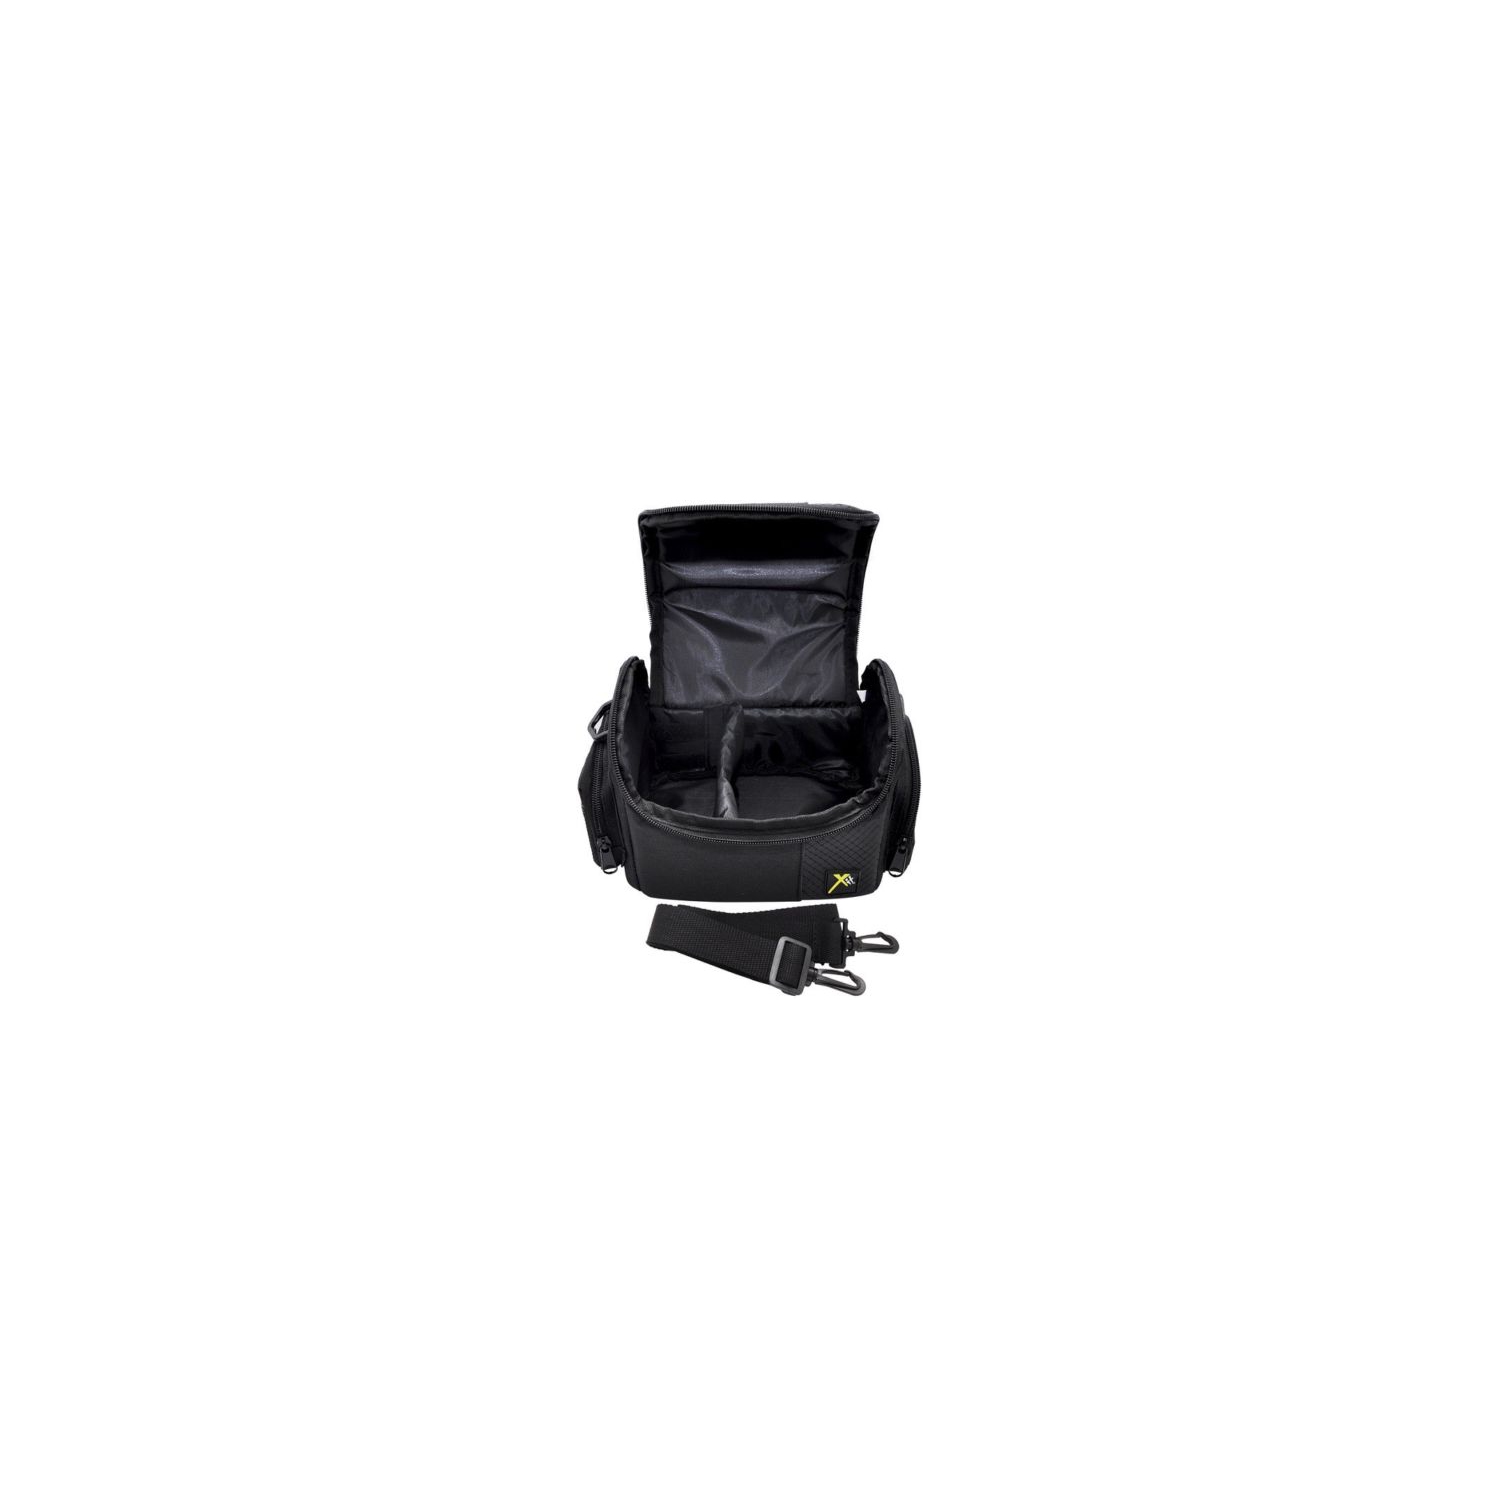 Pro Deluxe Camera Case Compact Carrying Bag For Nikon 1 J5 AW1